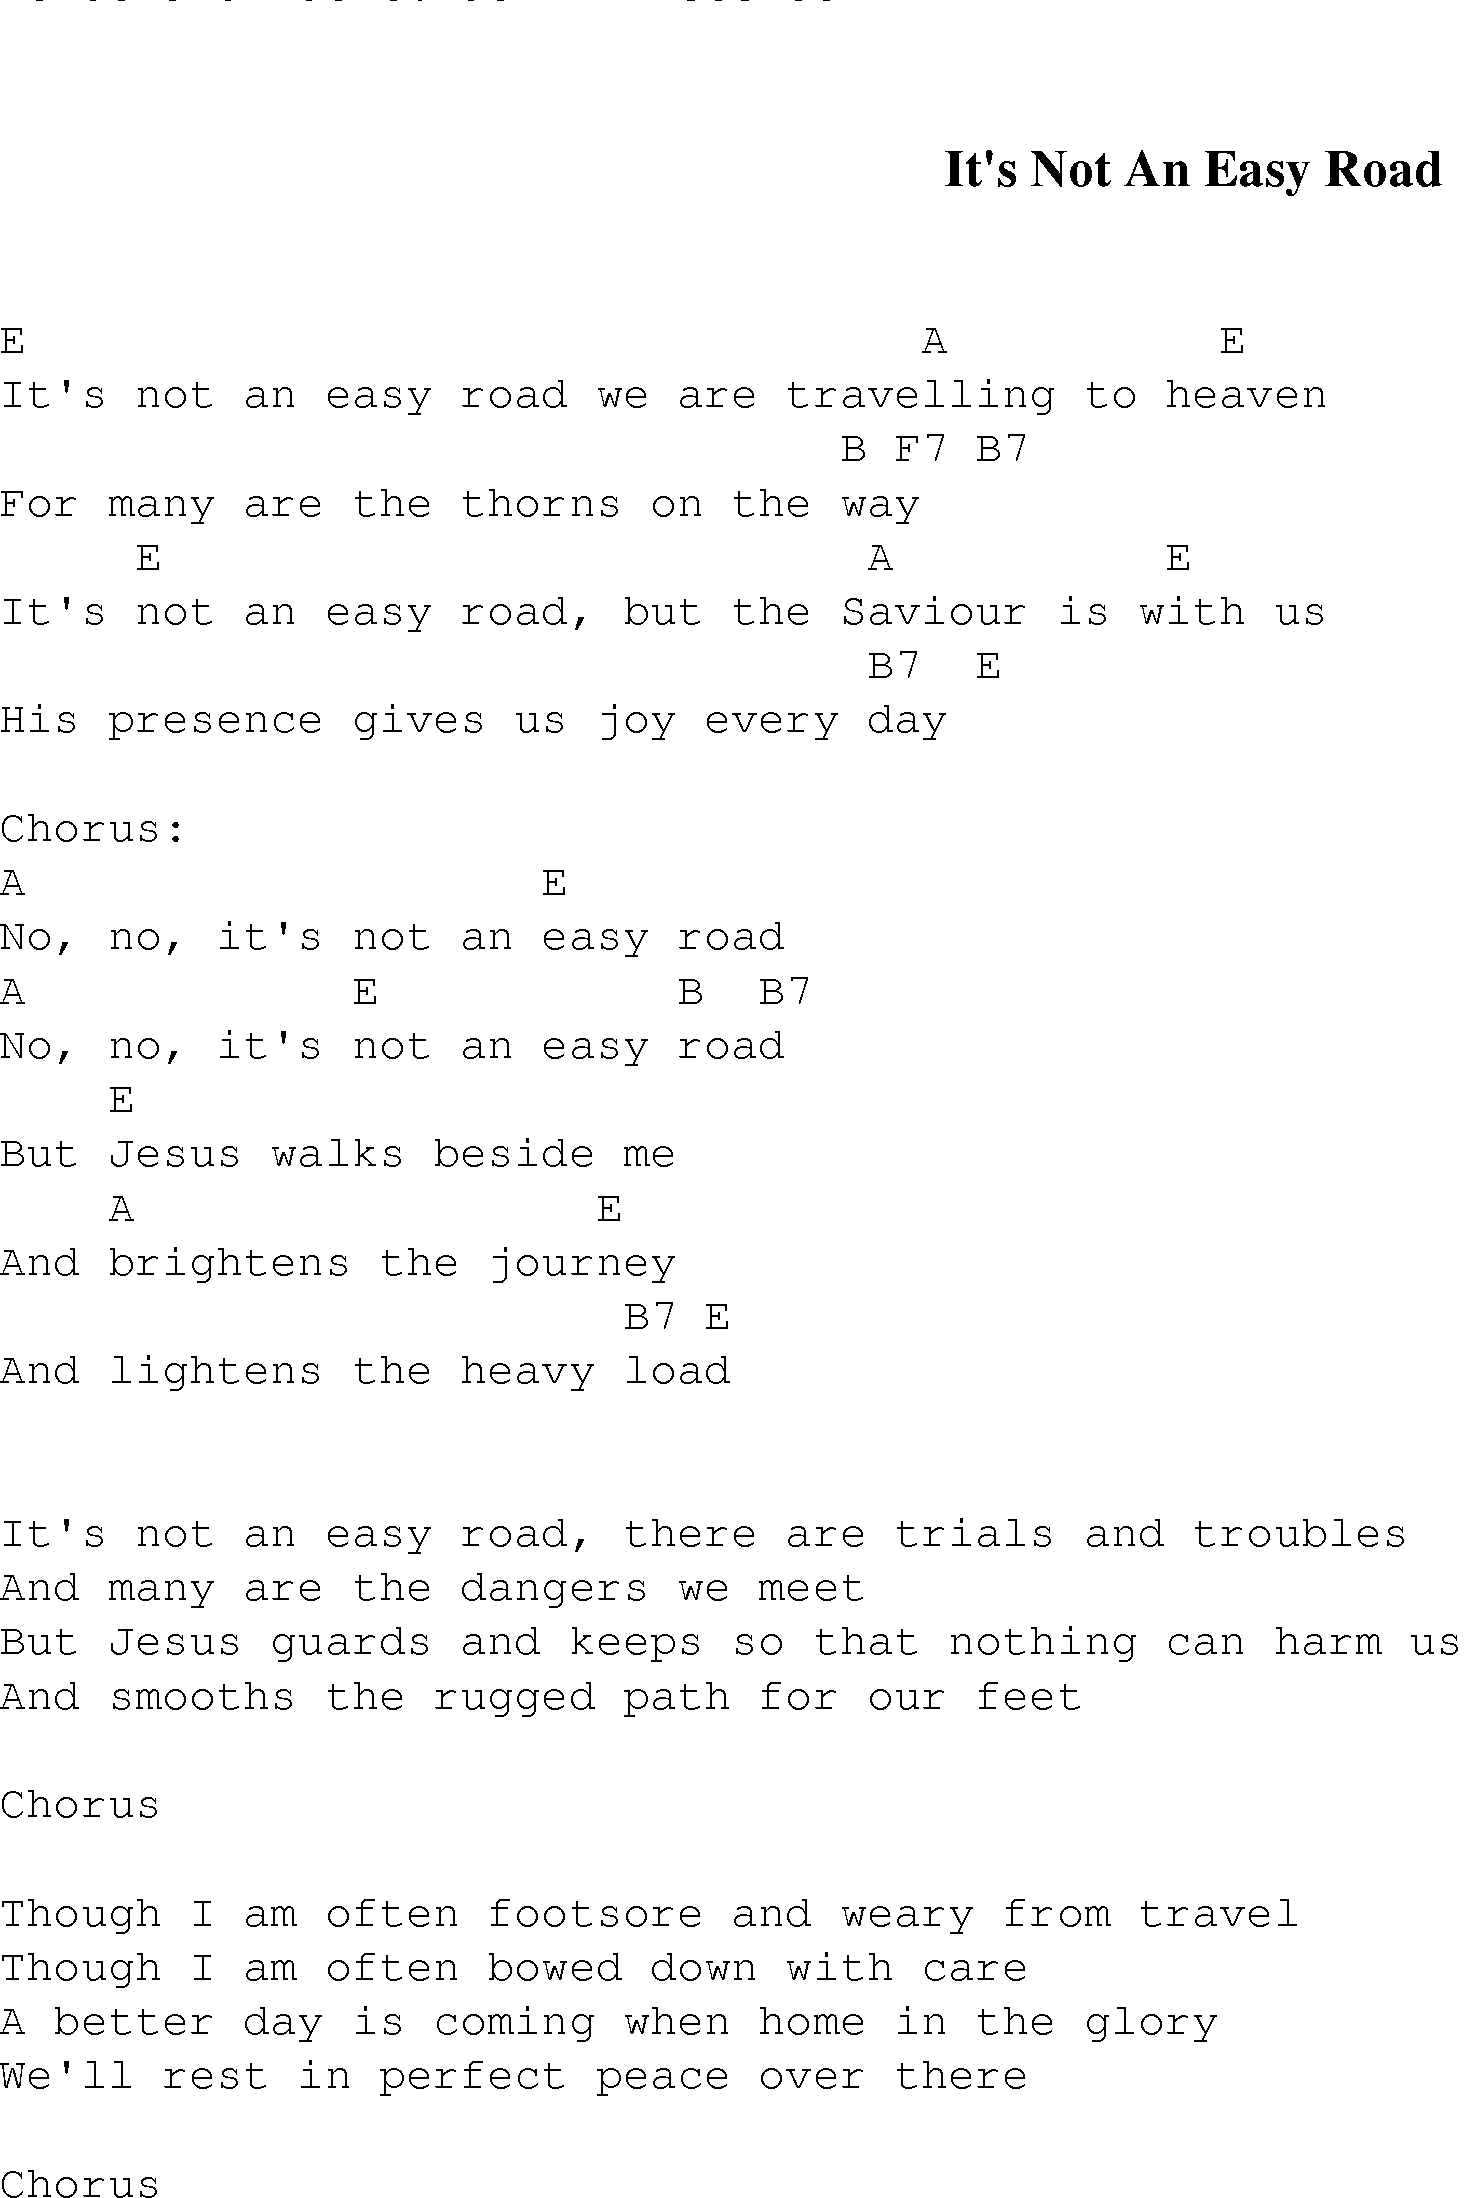 It&amp;#039;s Not An Easy Road - Christian Gospel Song Lyrics And Chords - Free Printable Lyrics To Christian Songs